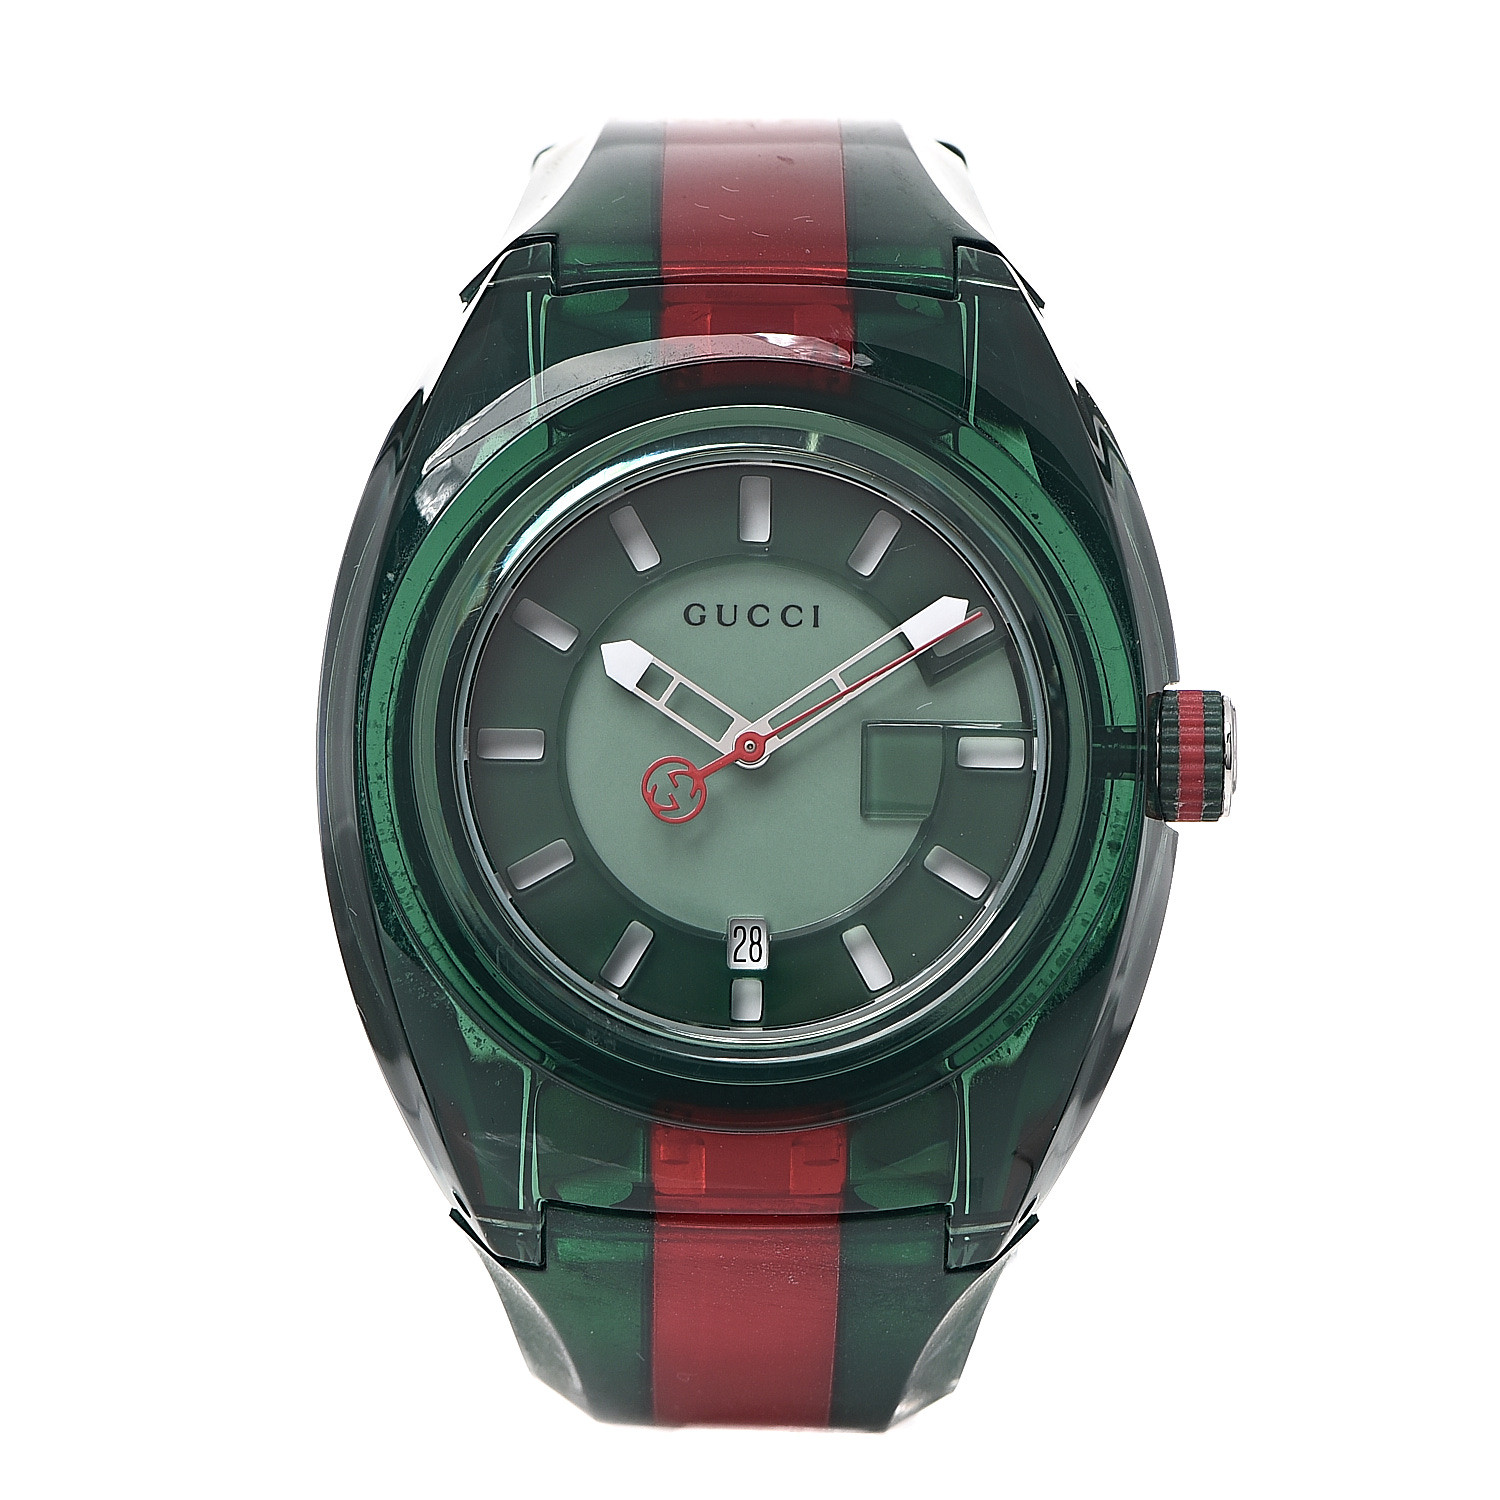 GUCCI Stainless Steel Rubber Mm Sync Web Quartz Watch Green FASHIONPHILE